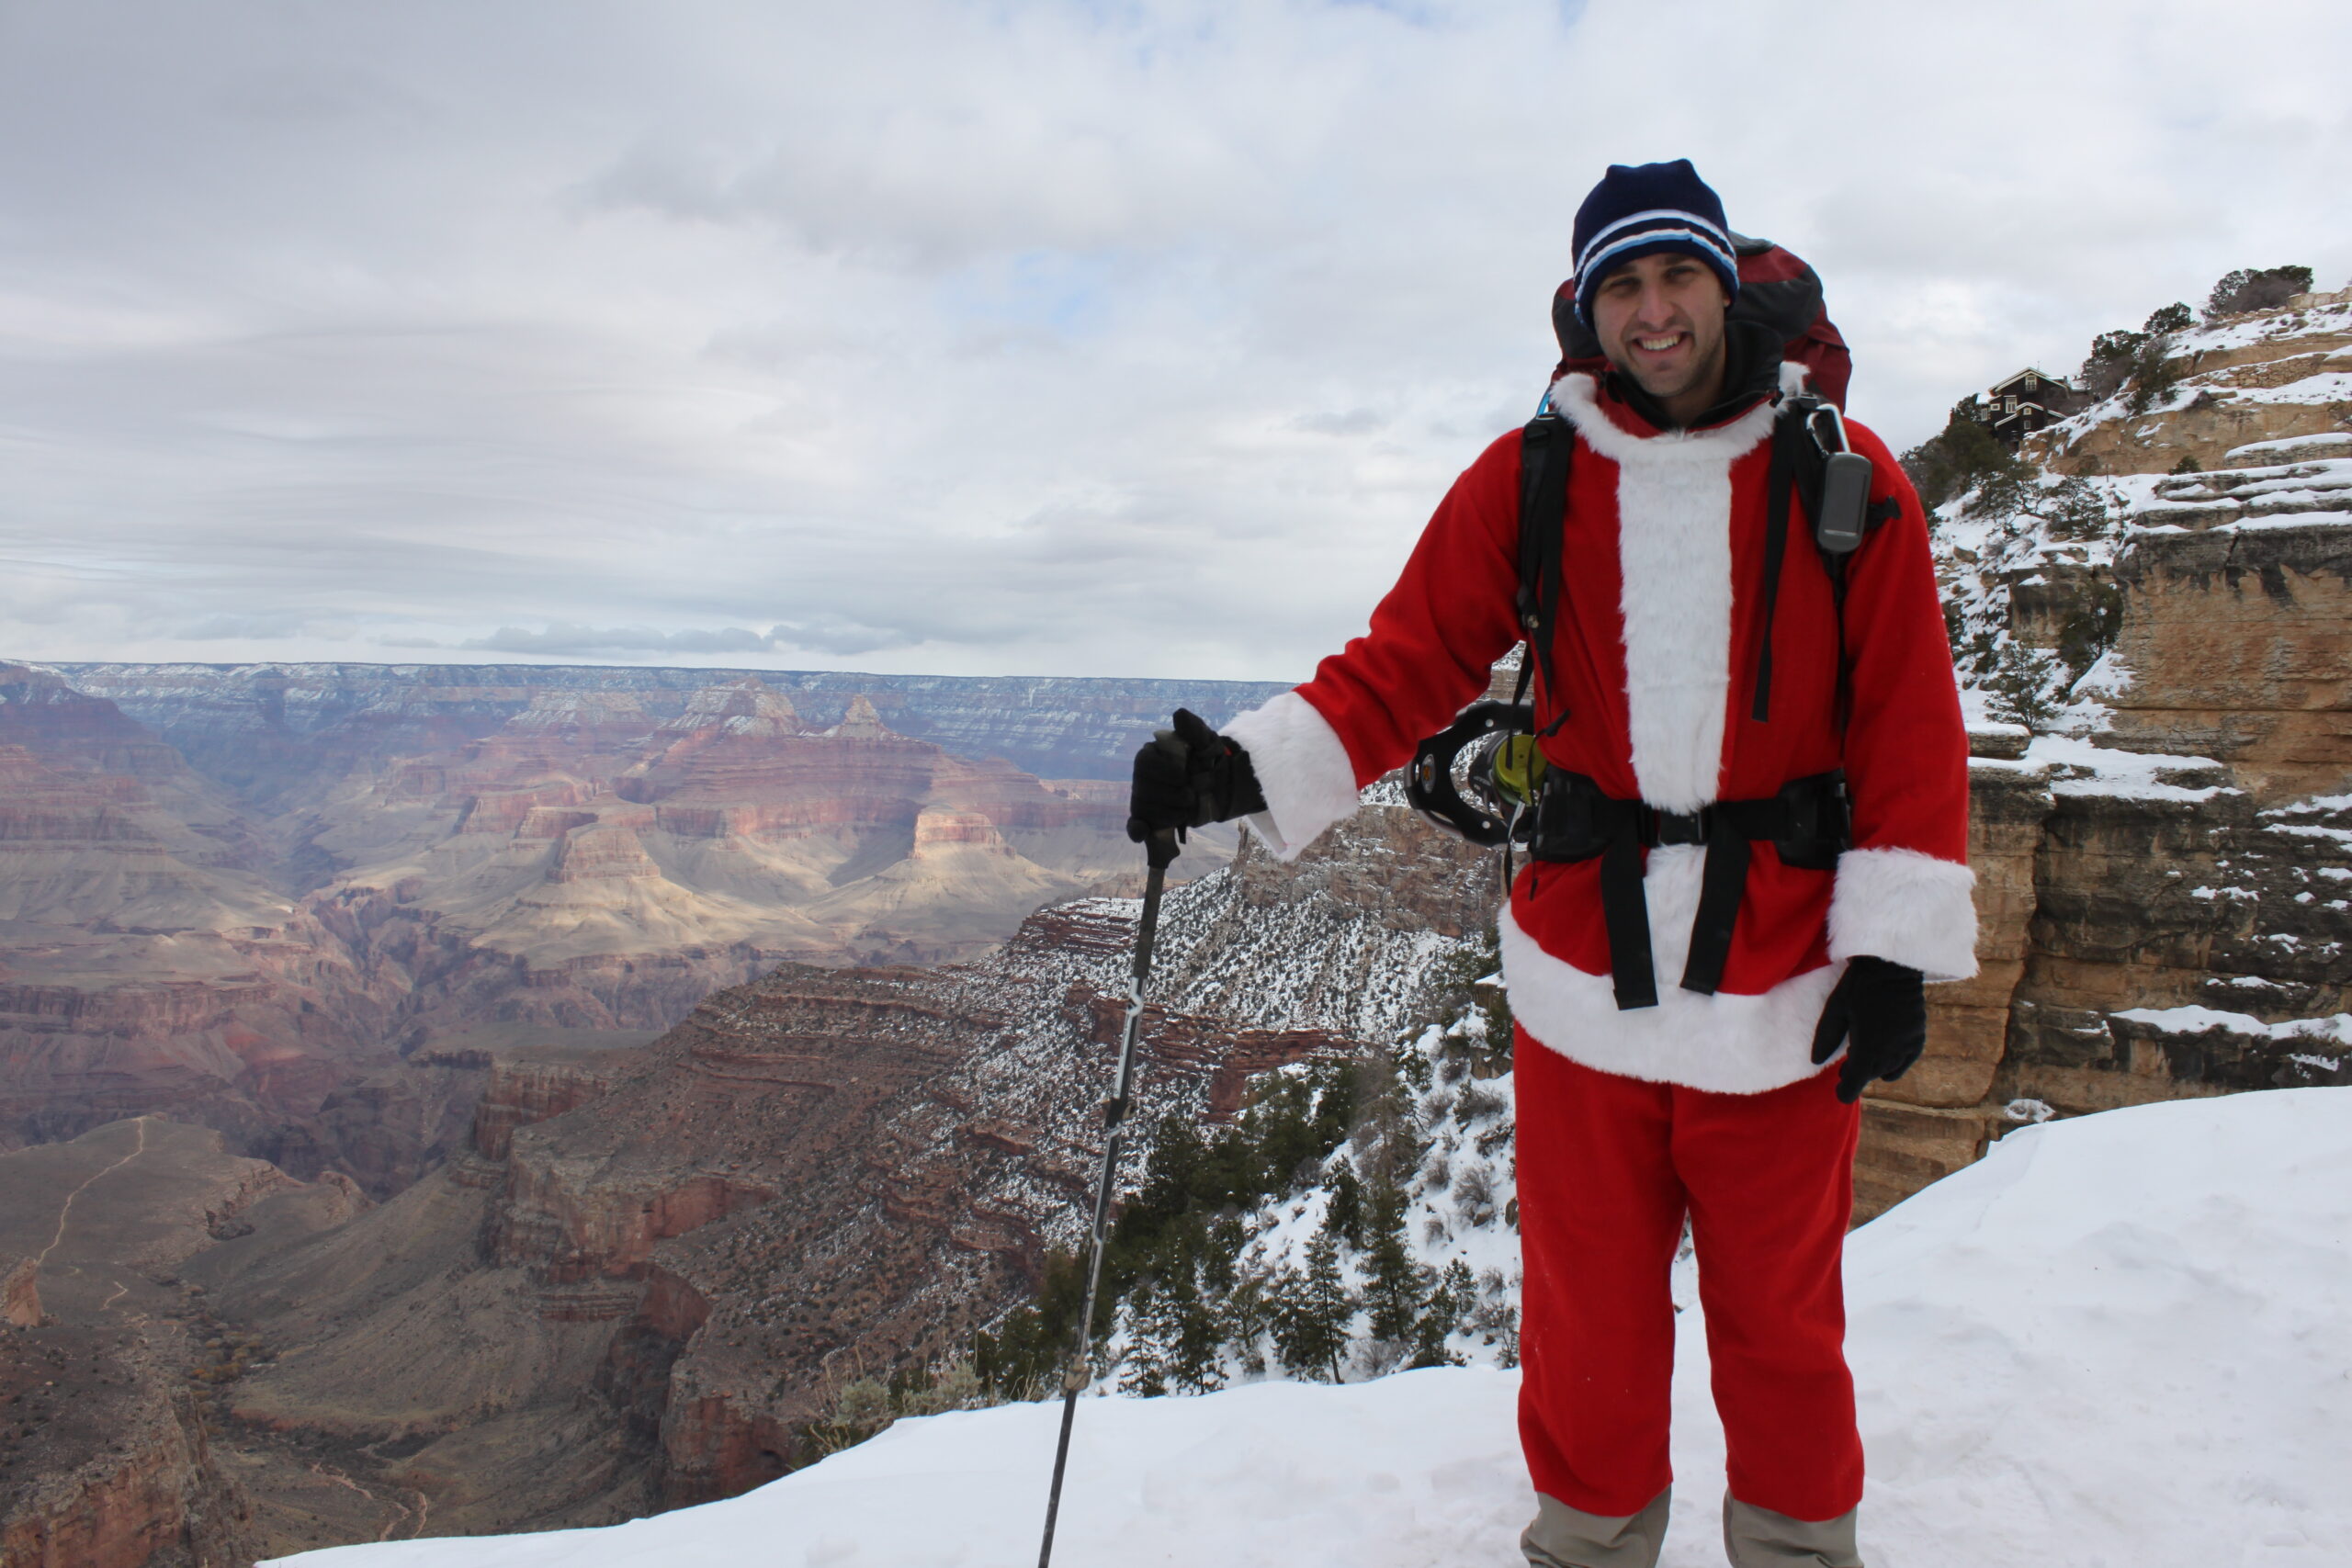 Hank poses in his Santa suit on Bright Angel Trail.